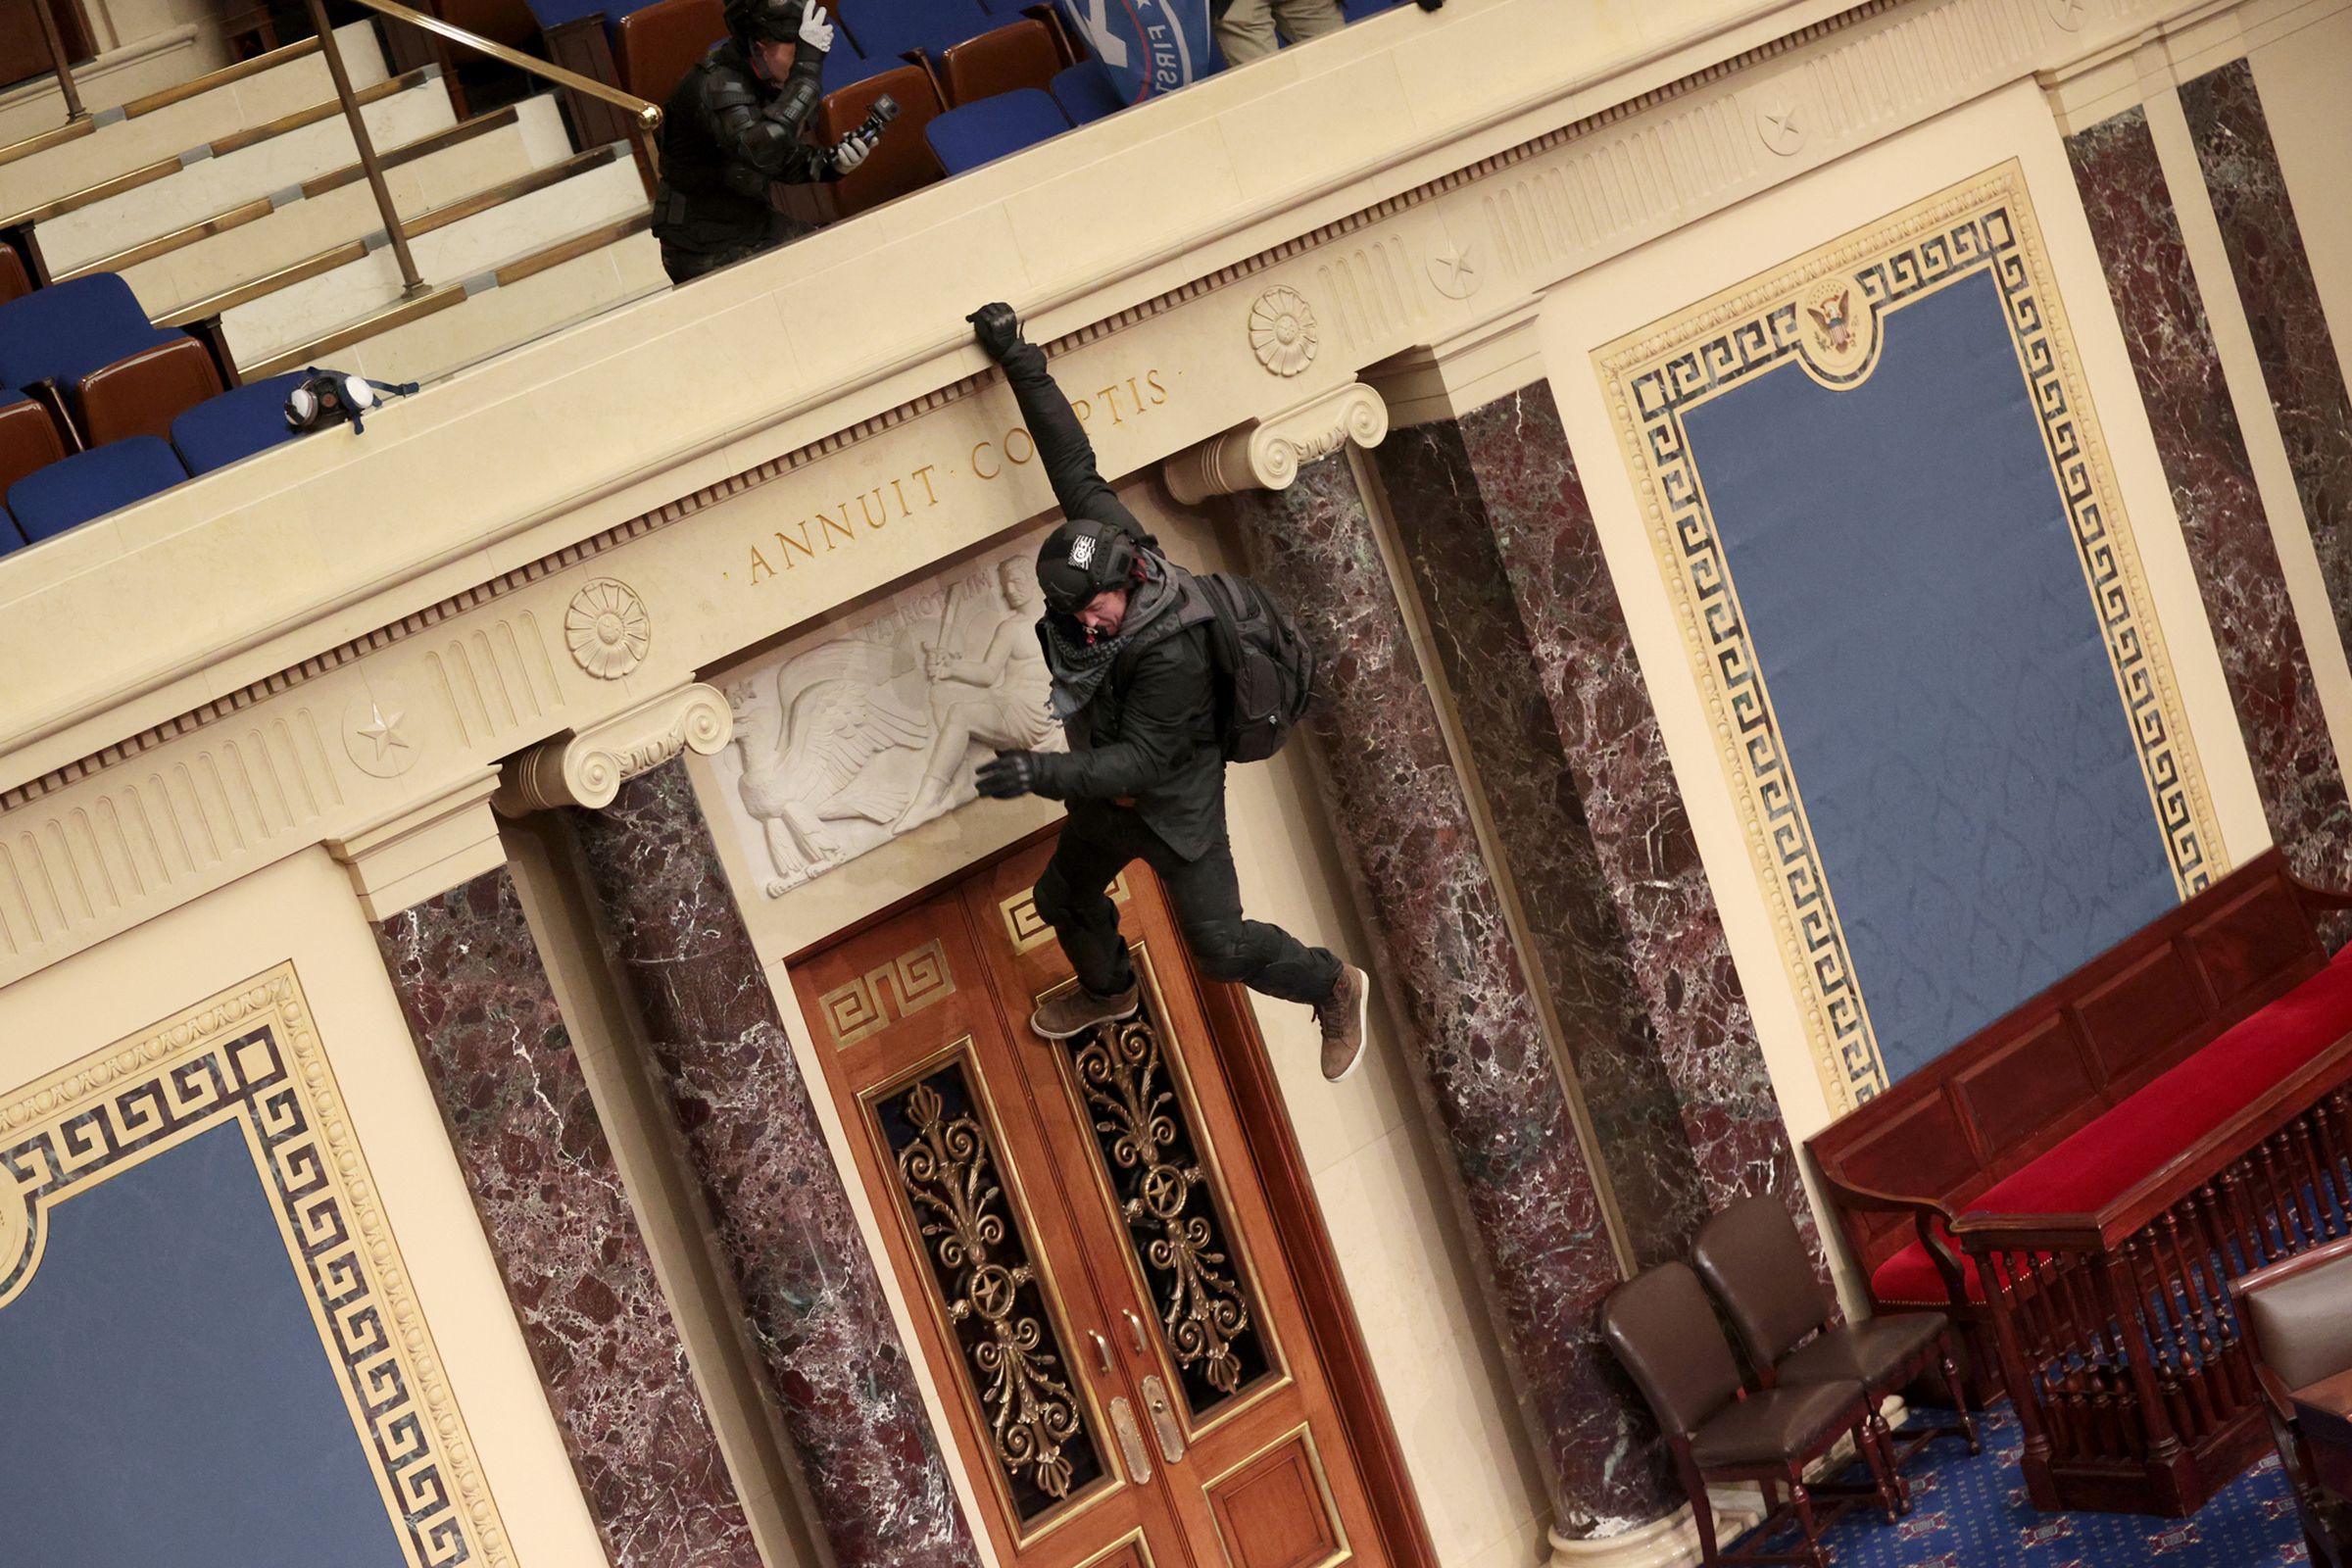 An intruder hangs from the Senate balcony, attempting to drop to the lower level.